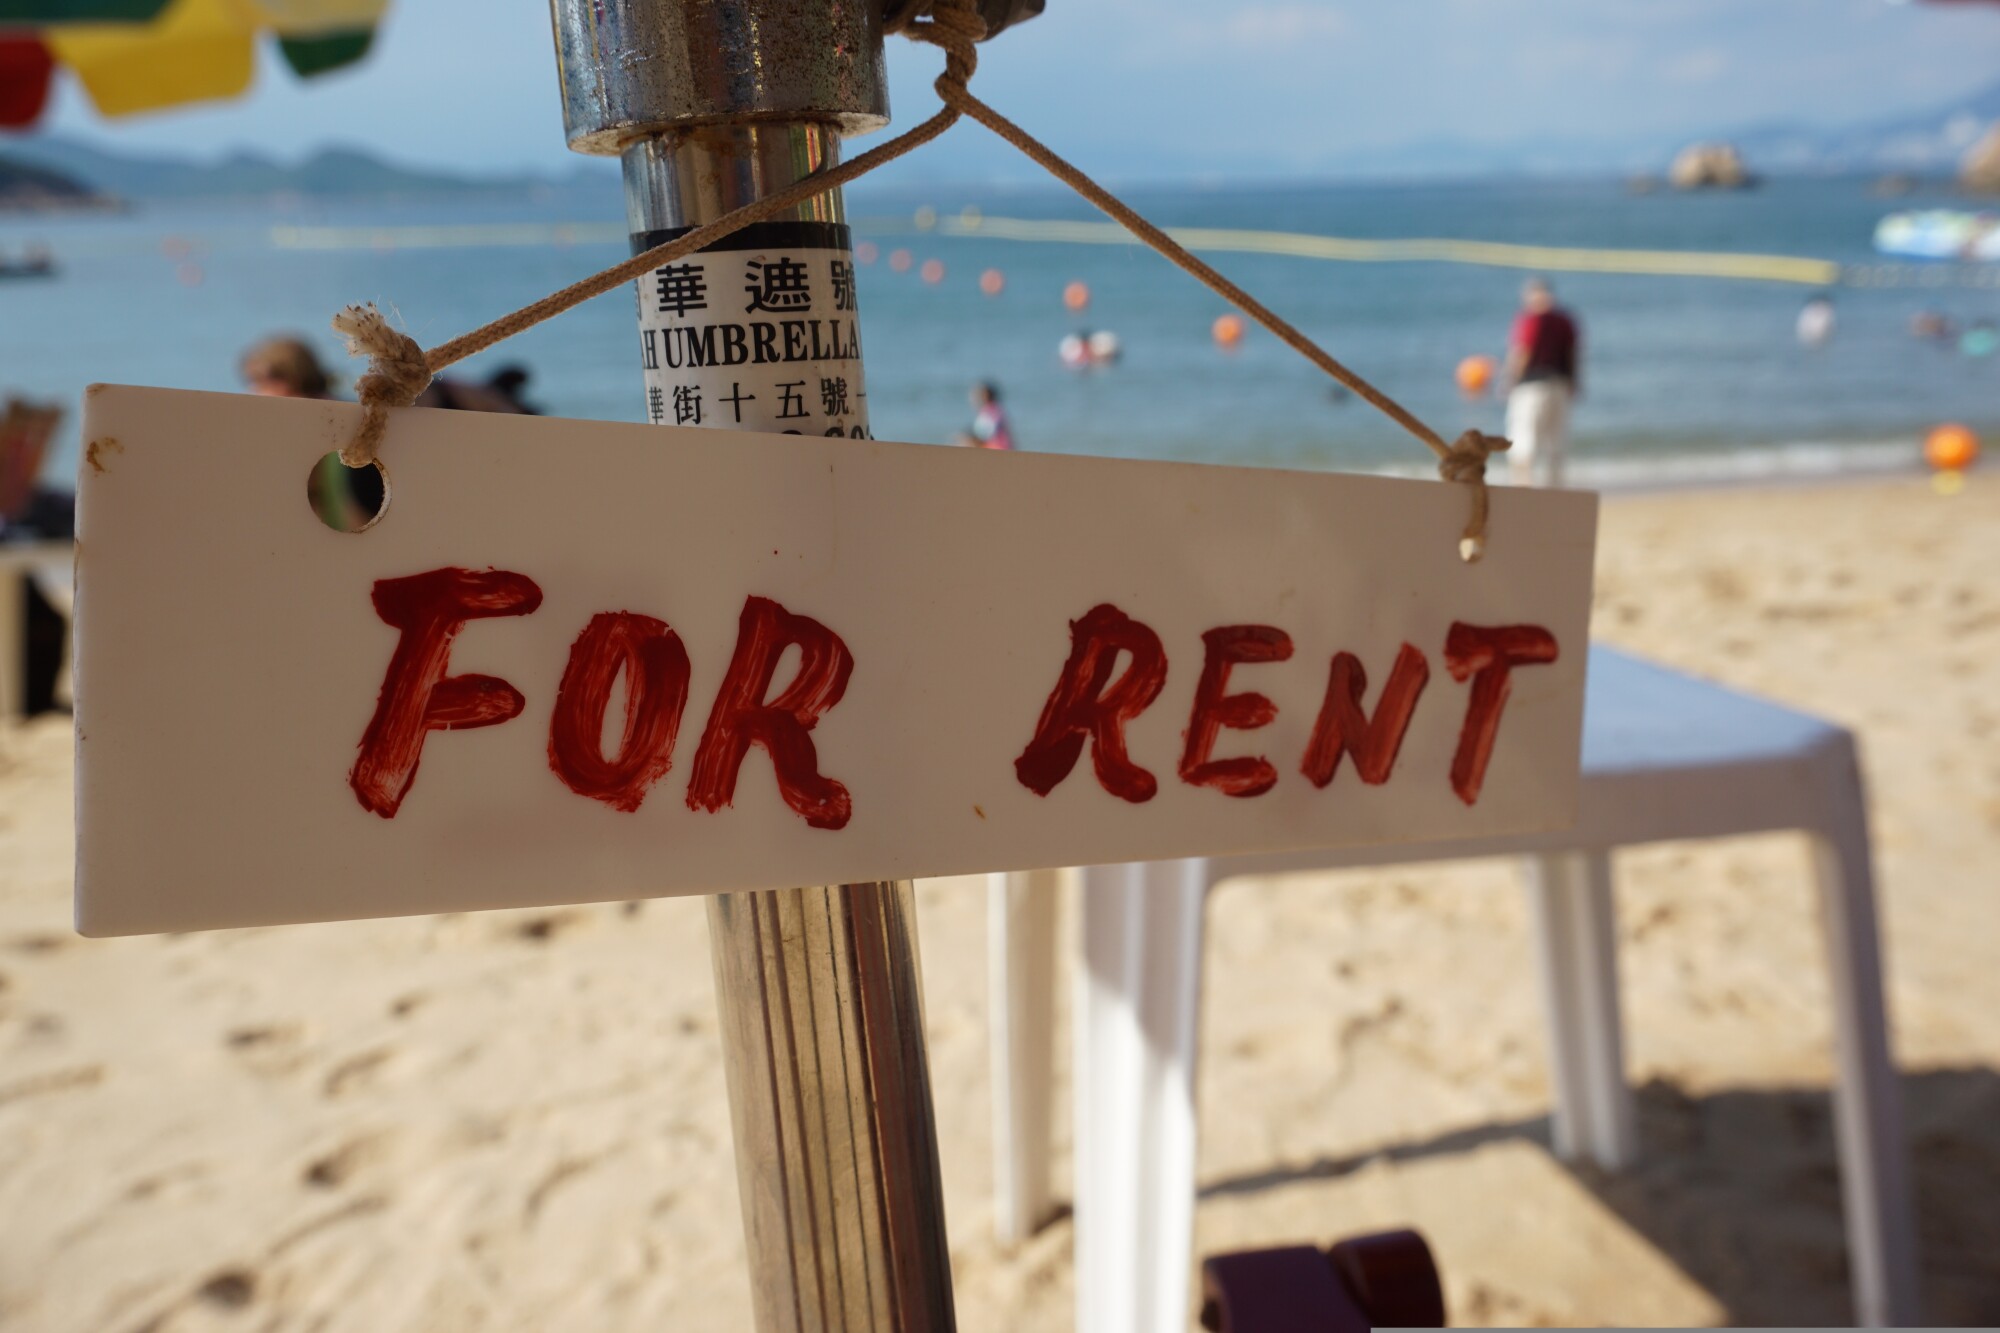 3 Common Short Term Property Management Mistakes to Avoid